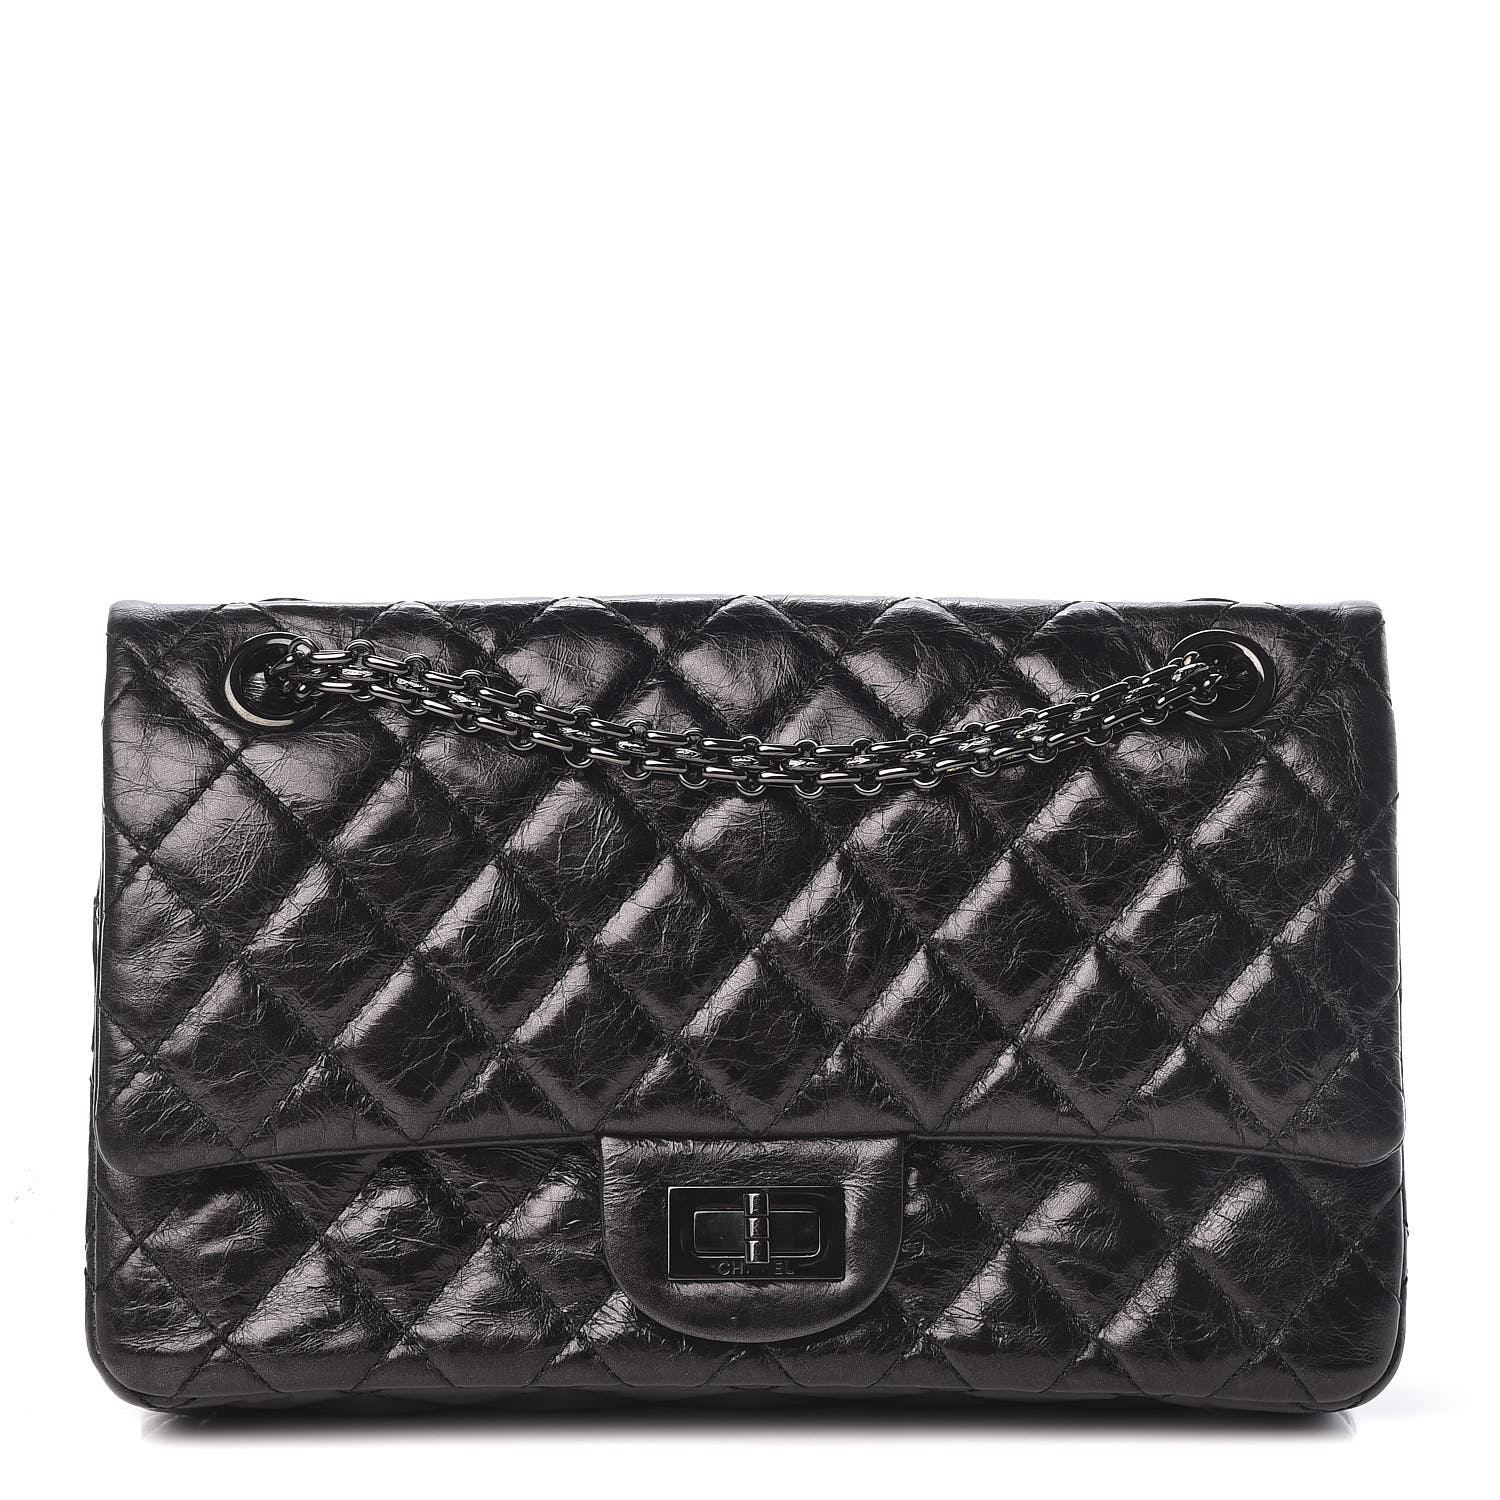 CHANEL Metallic Aged Calfskin Quilted 2.55 Reissue 225 Flap So Black 462605